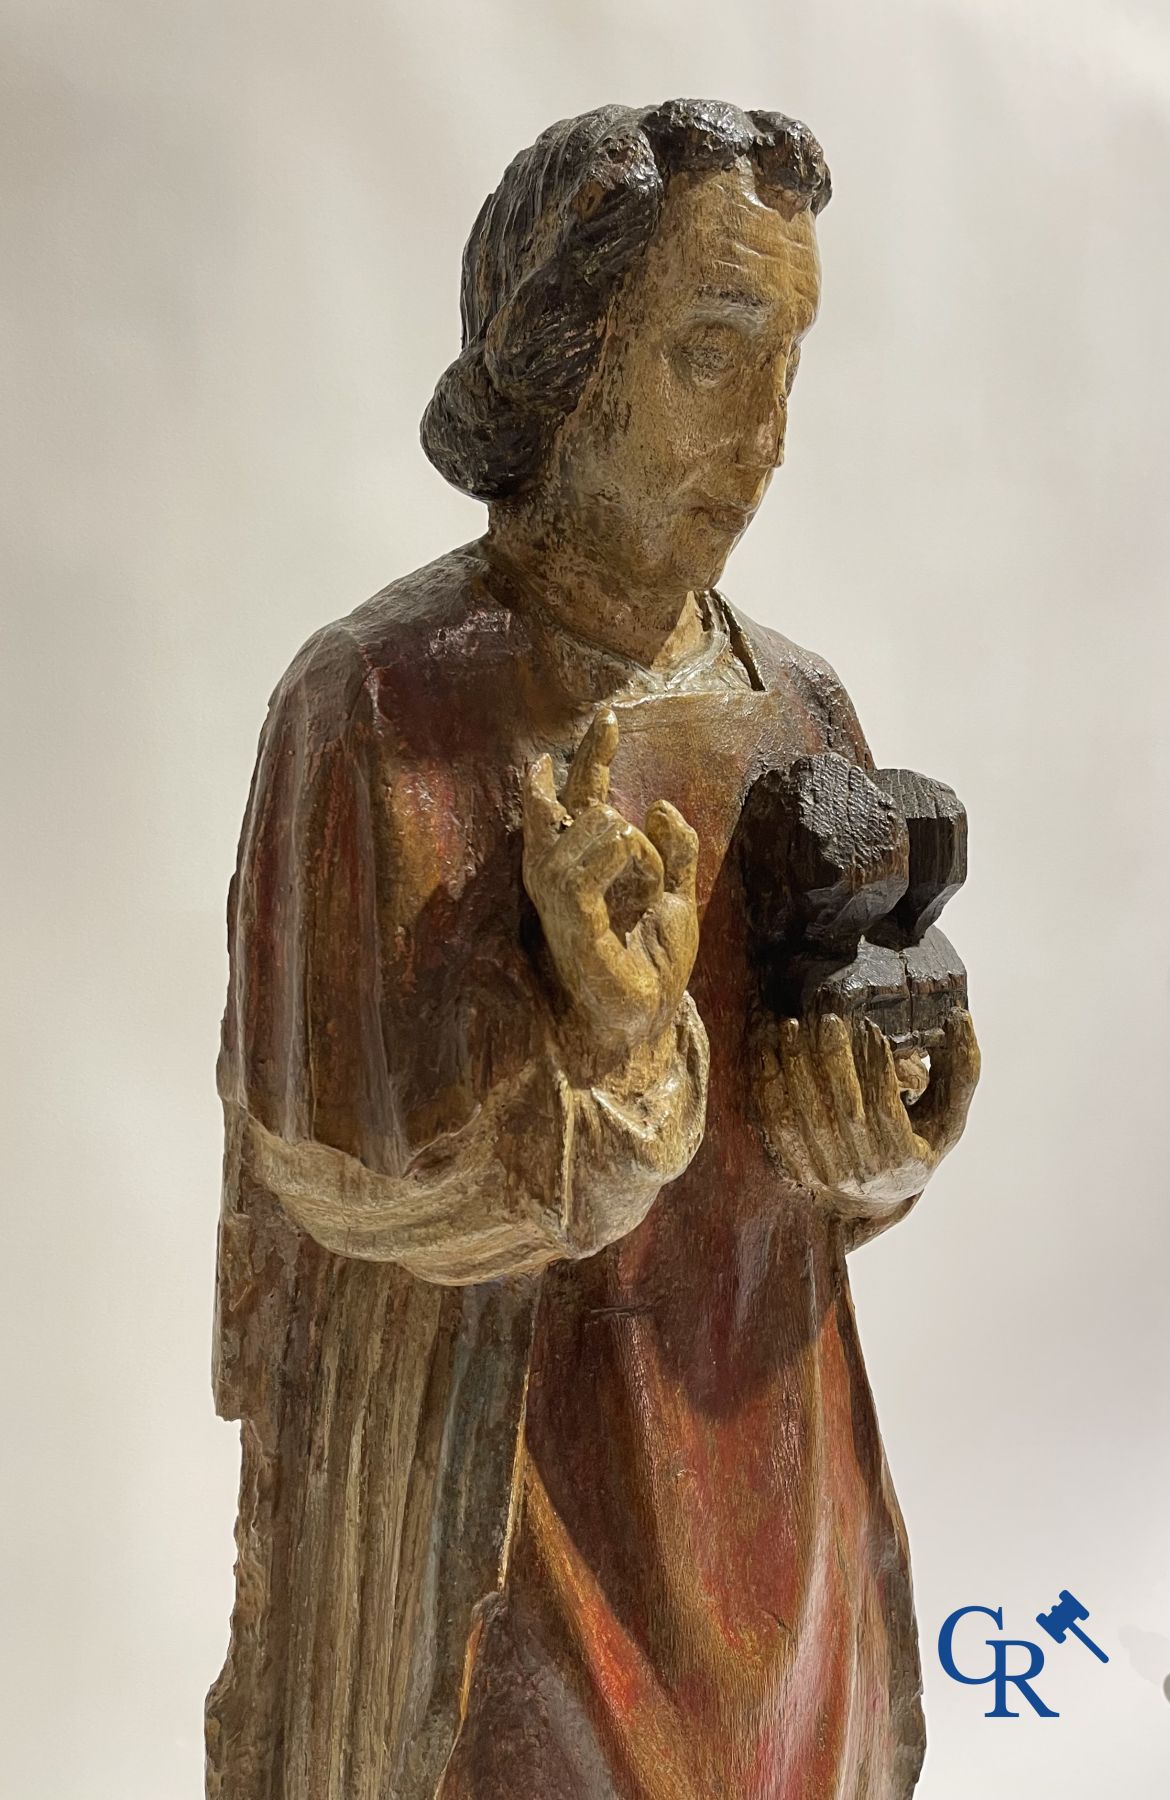 Wooden sculpture: Polychrome wood sculpture of a saint. Saint Stephen. Probably 17th century. - Image 12 of 26